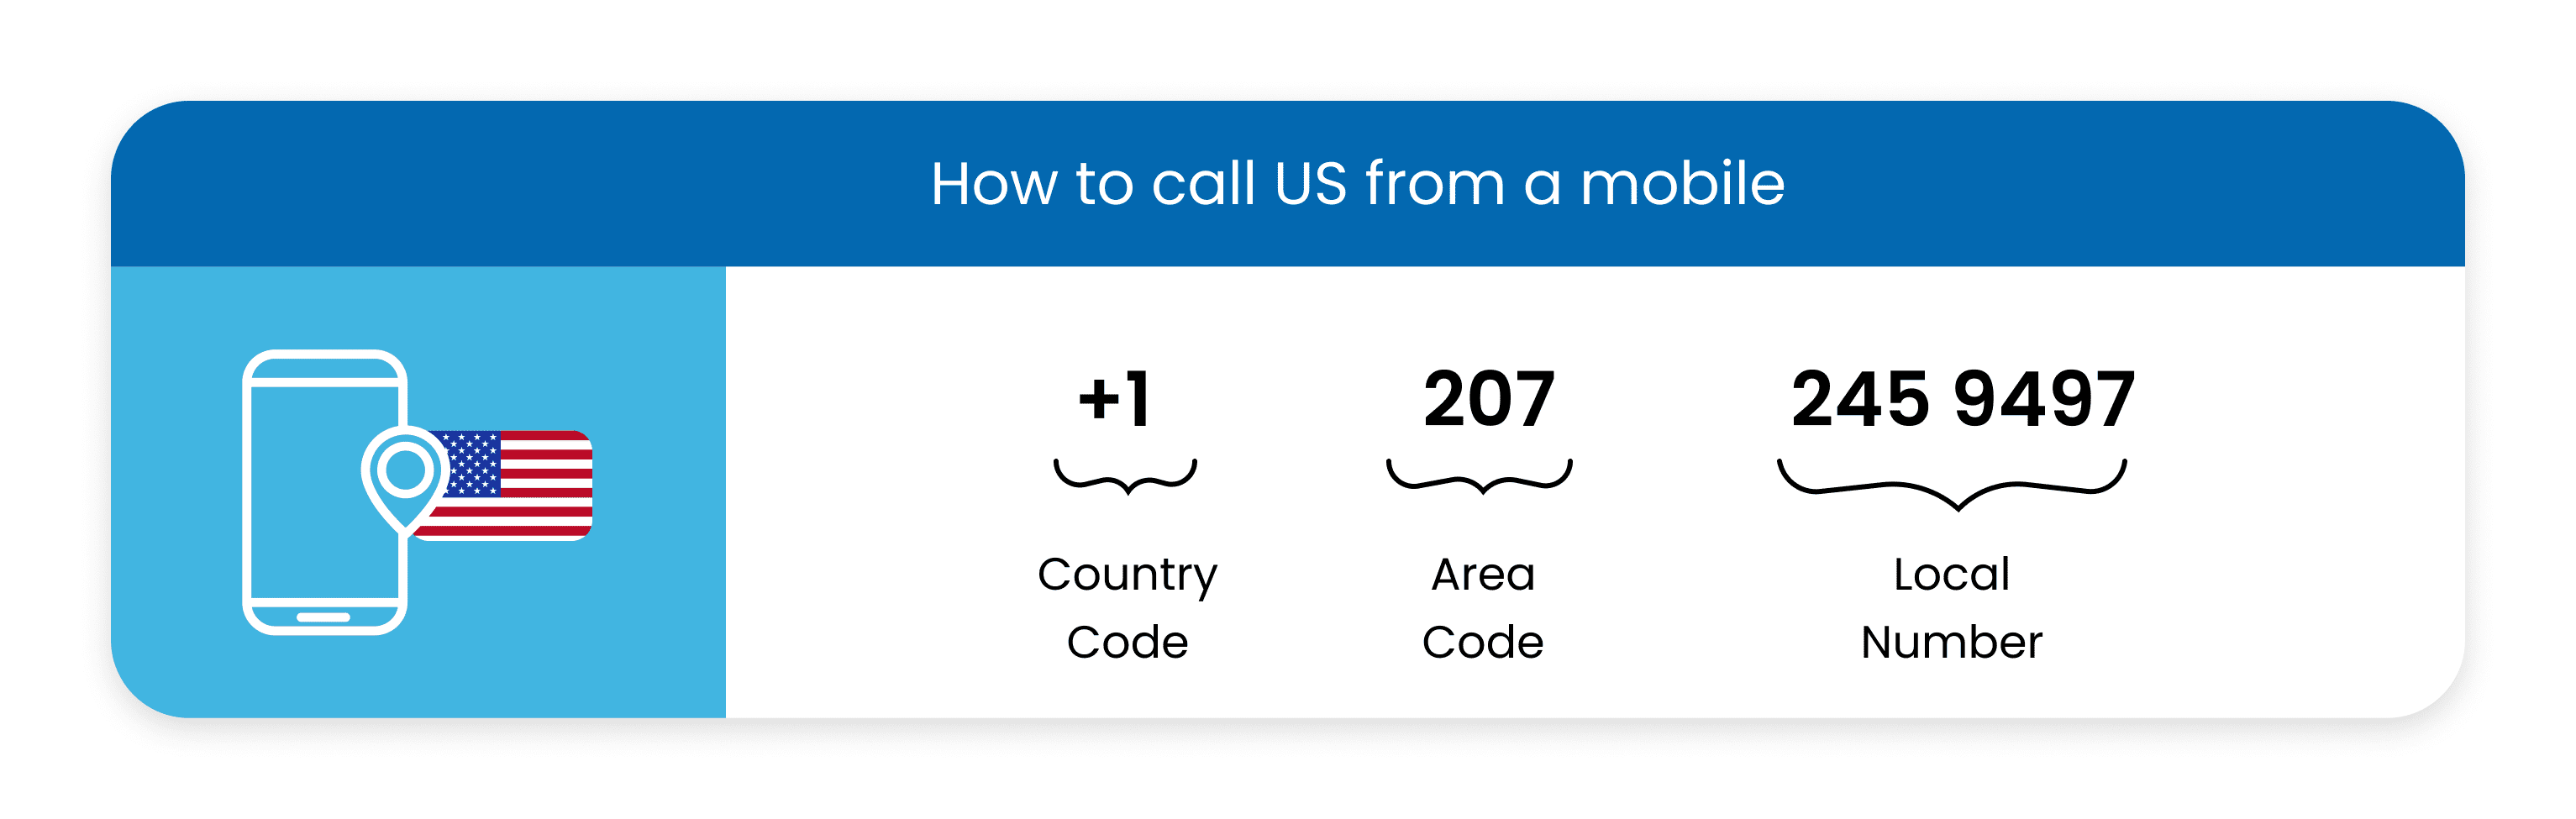 Call-US-from-Australia-Mobile